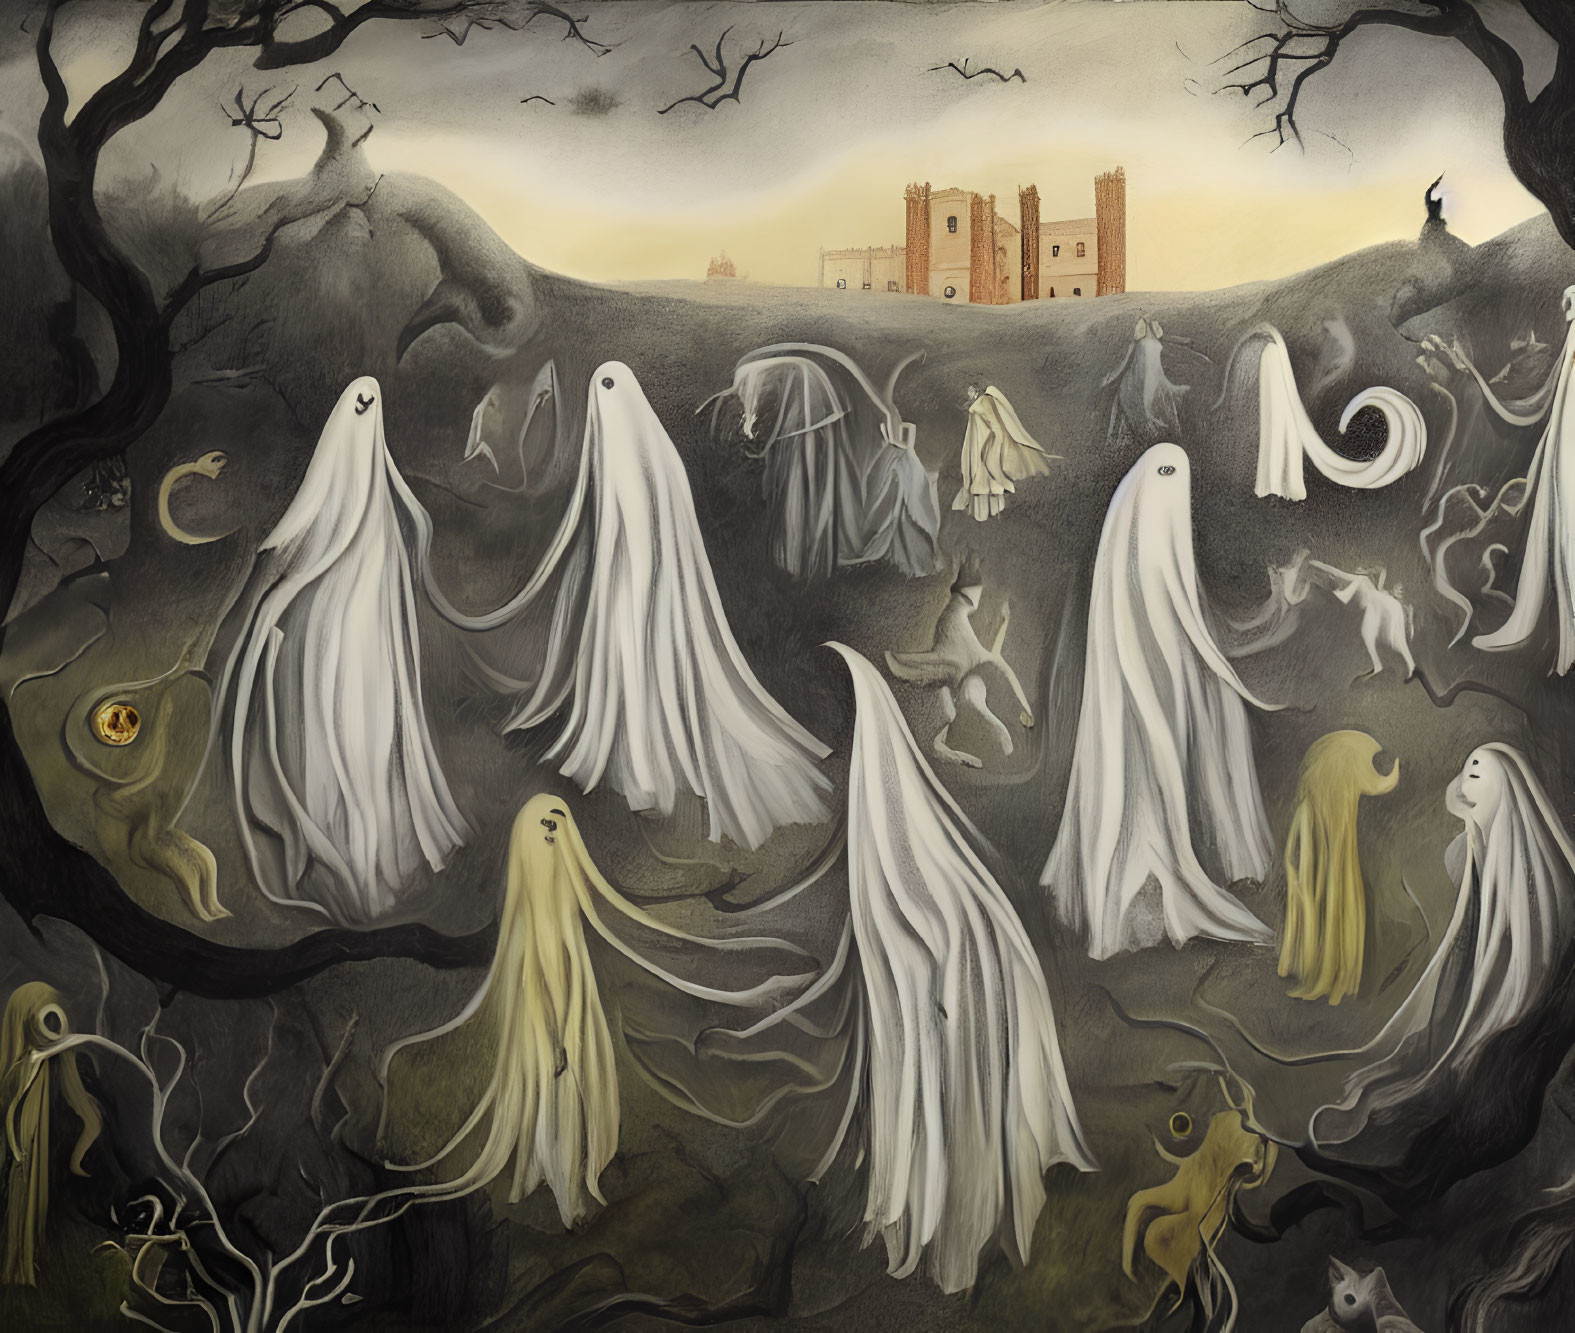 Spooky Halloween illustration with ghostly figures, jack-o'-lantern, castle, and bare trees